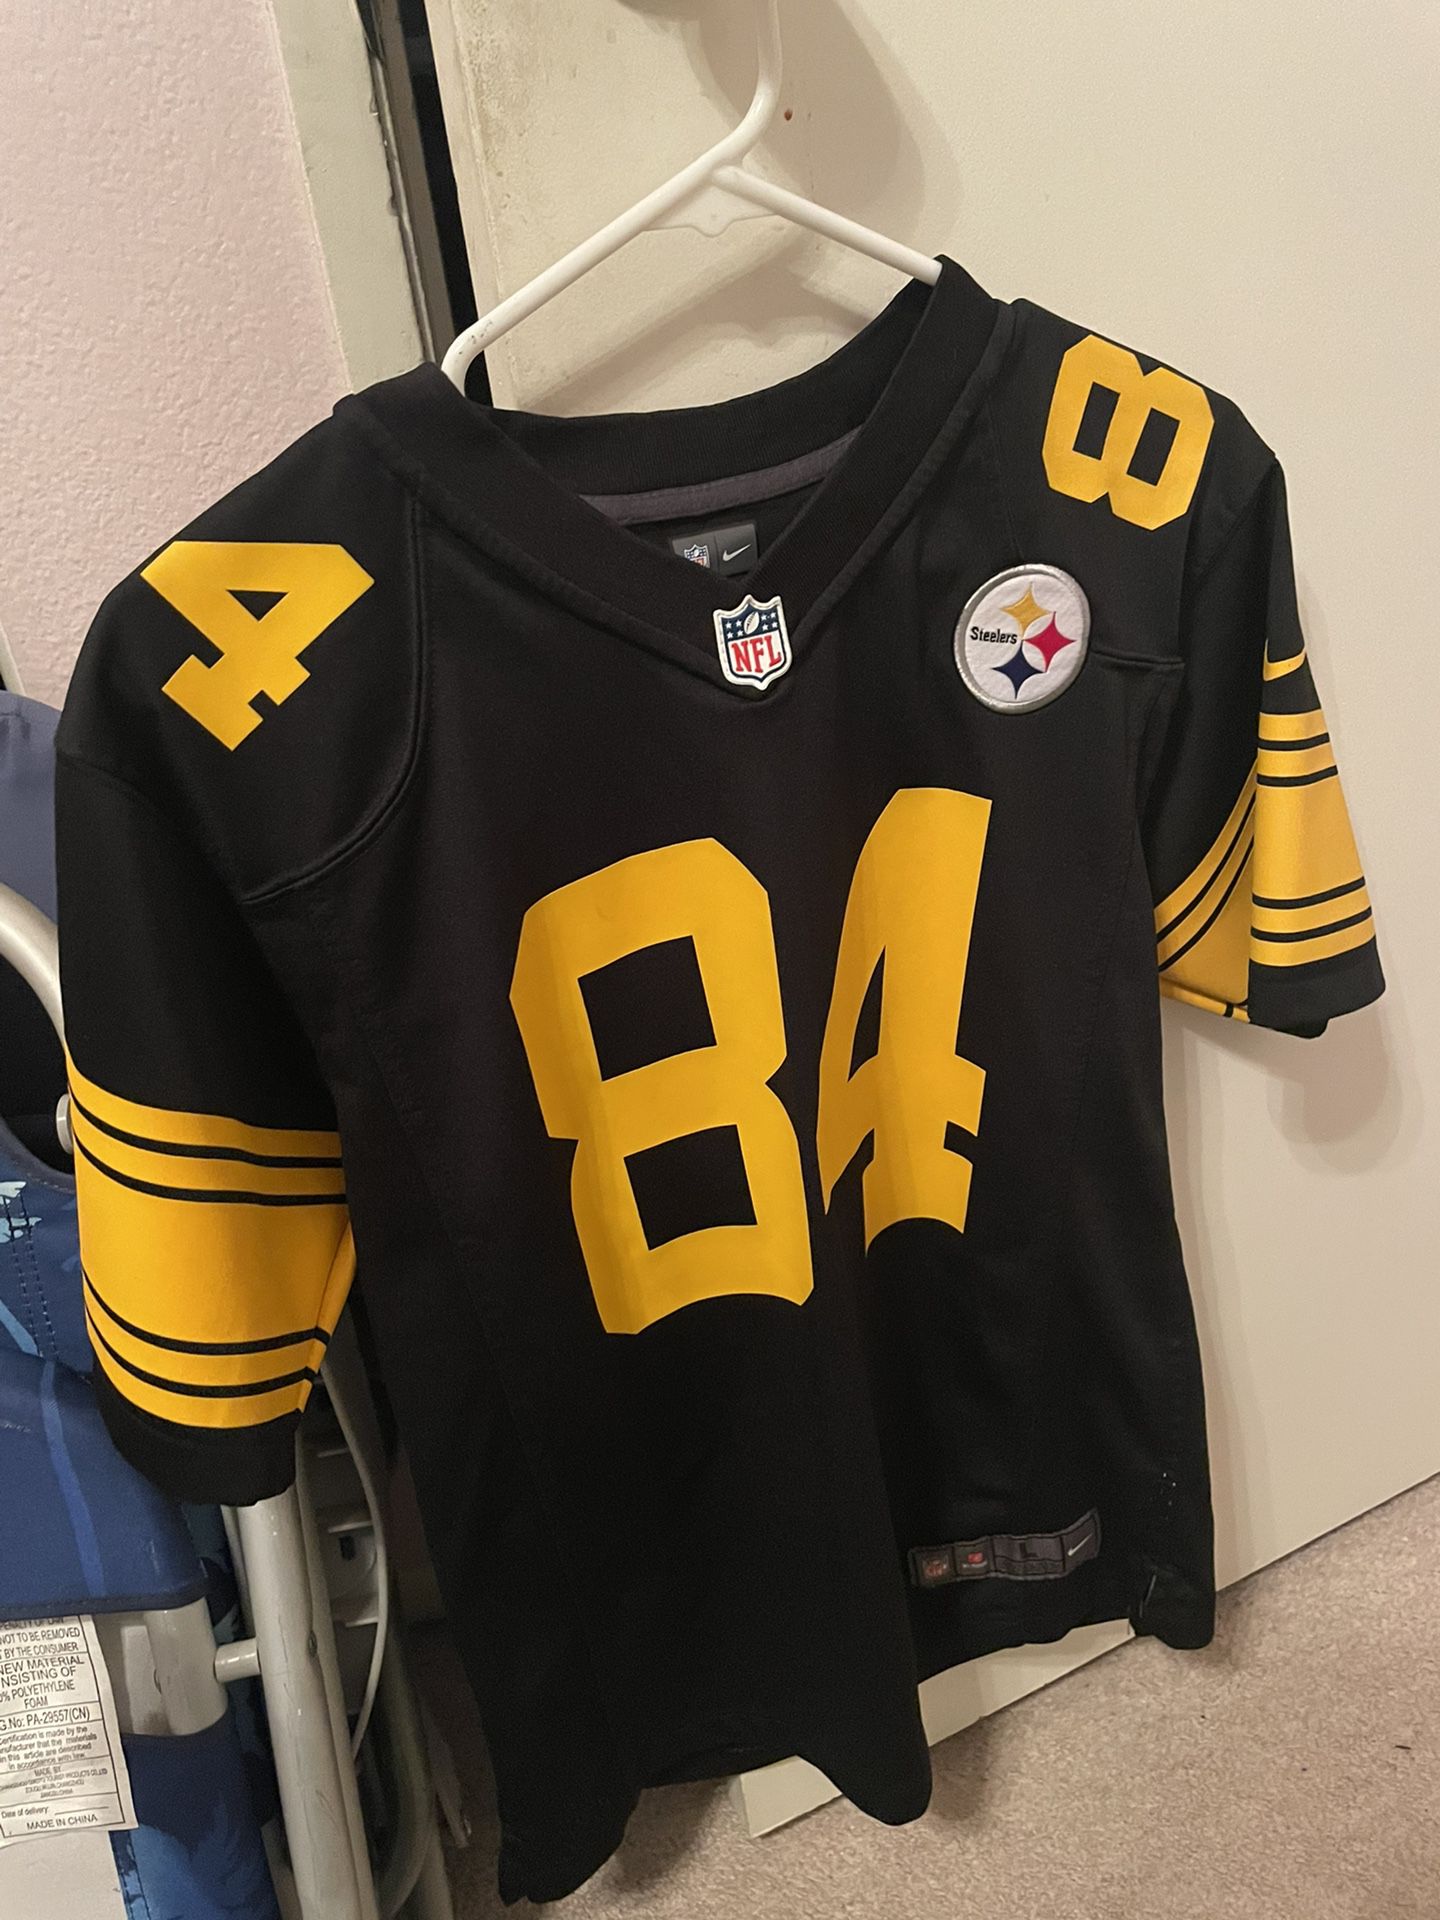 brown 84 jersey